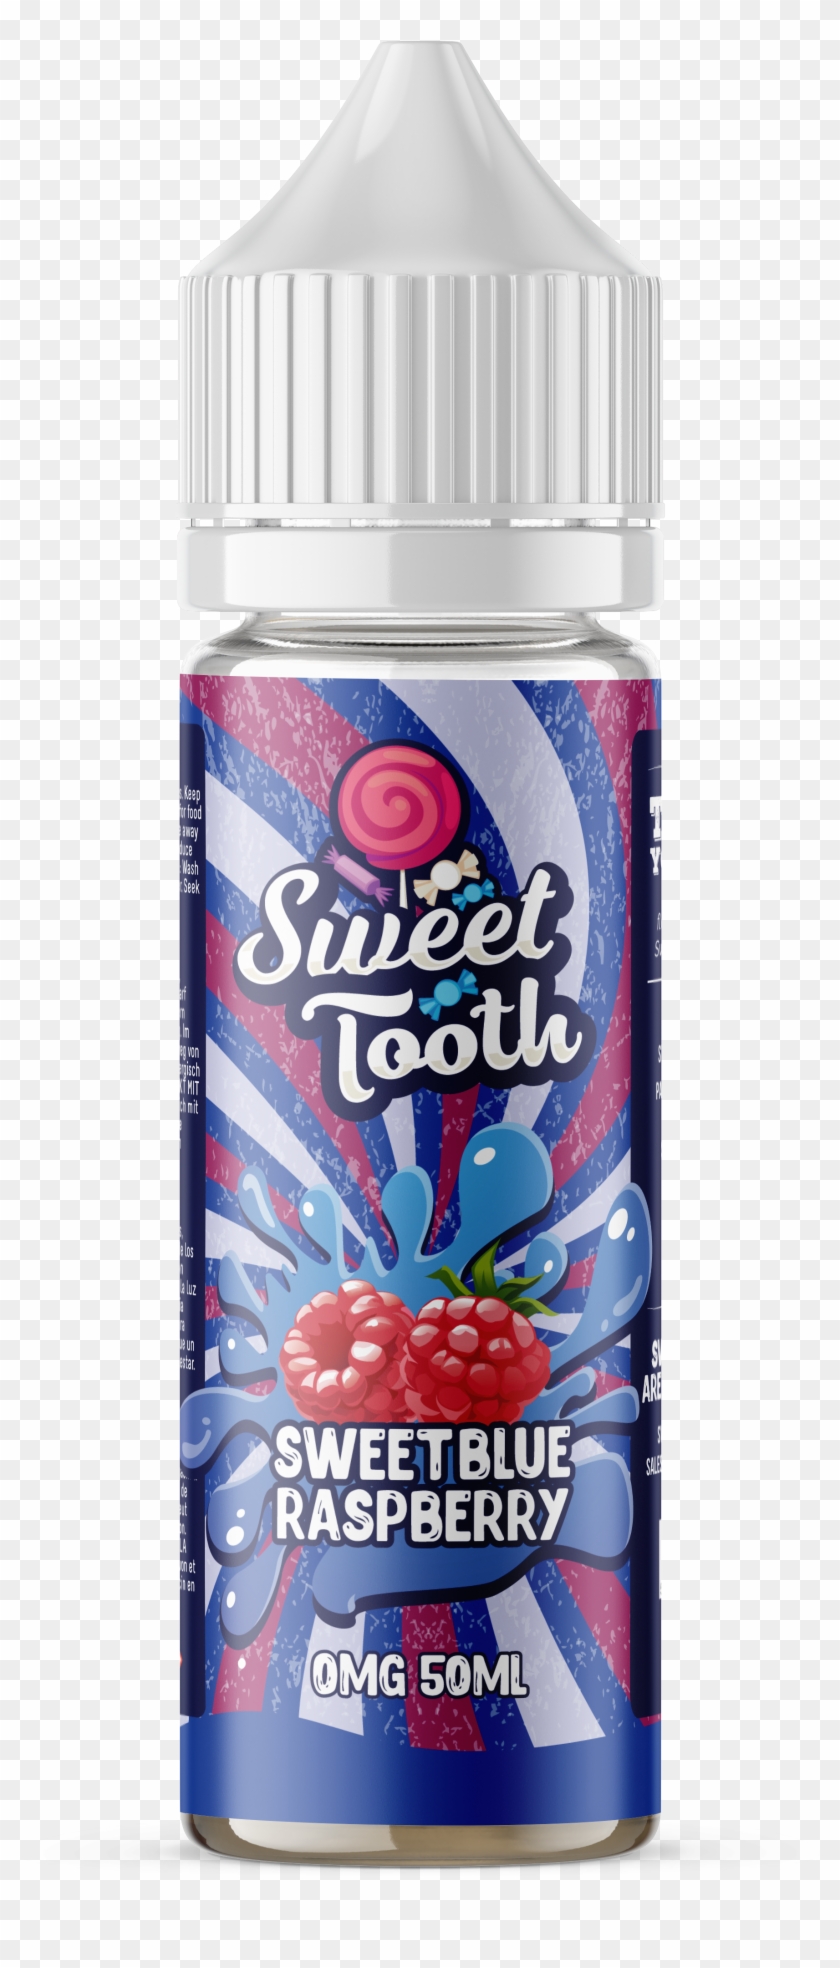 Sweet Tooth E Liquid - Composition Of Electronic Cigarette Aerosol Clipart